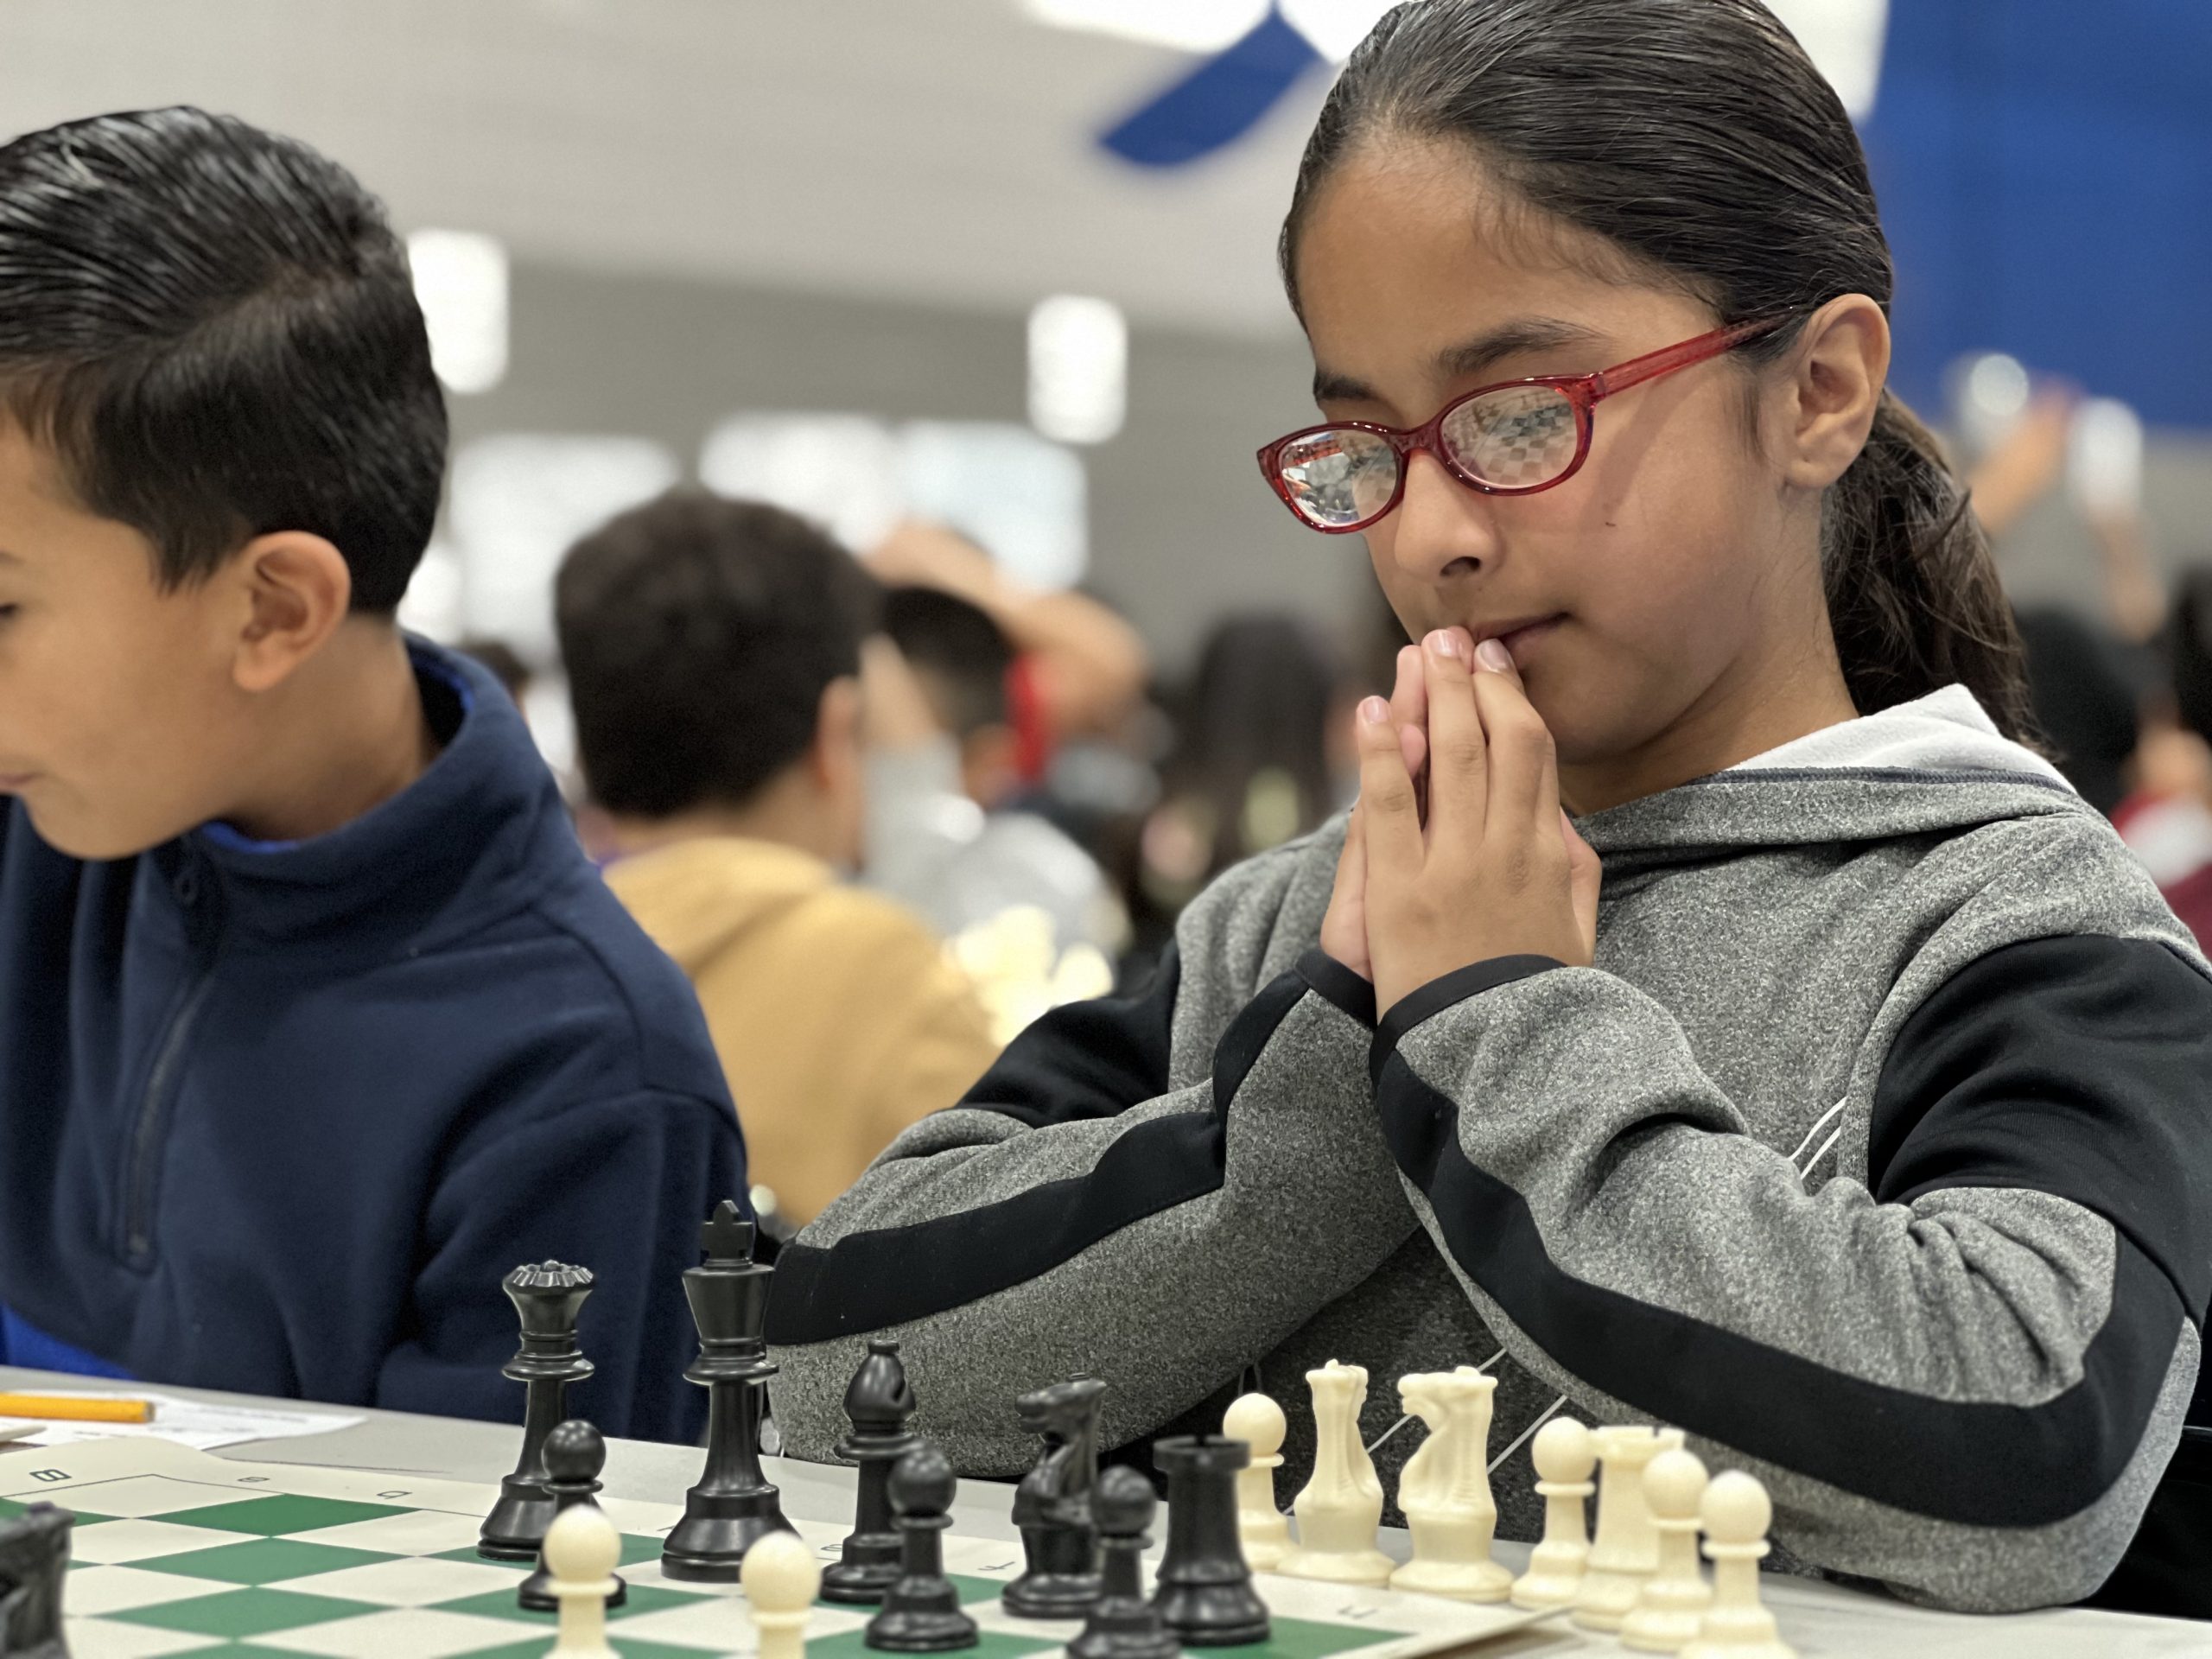 Dallas ISD chess tournaments hit recordbreaking numbers of